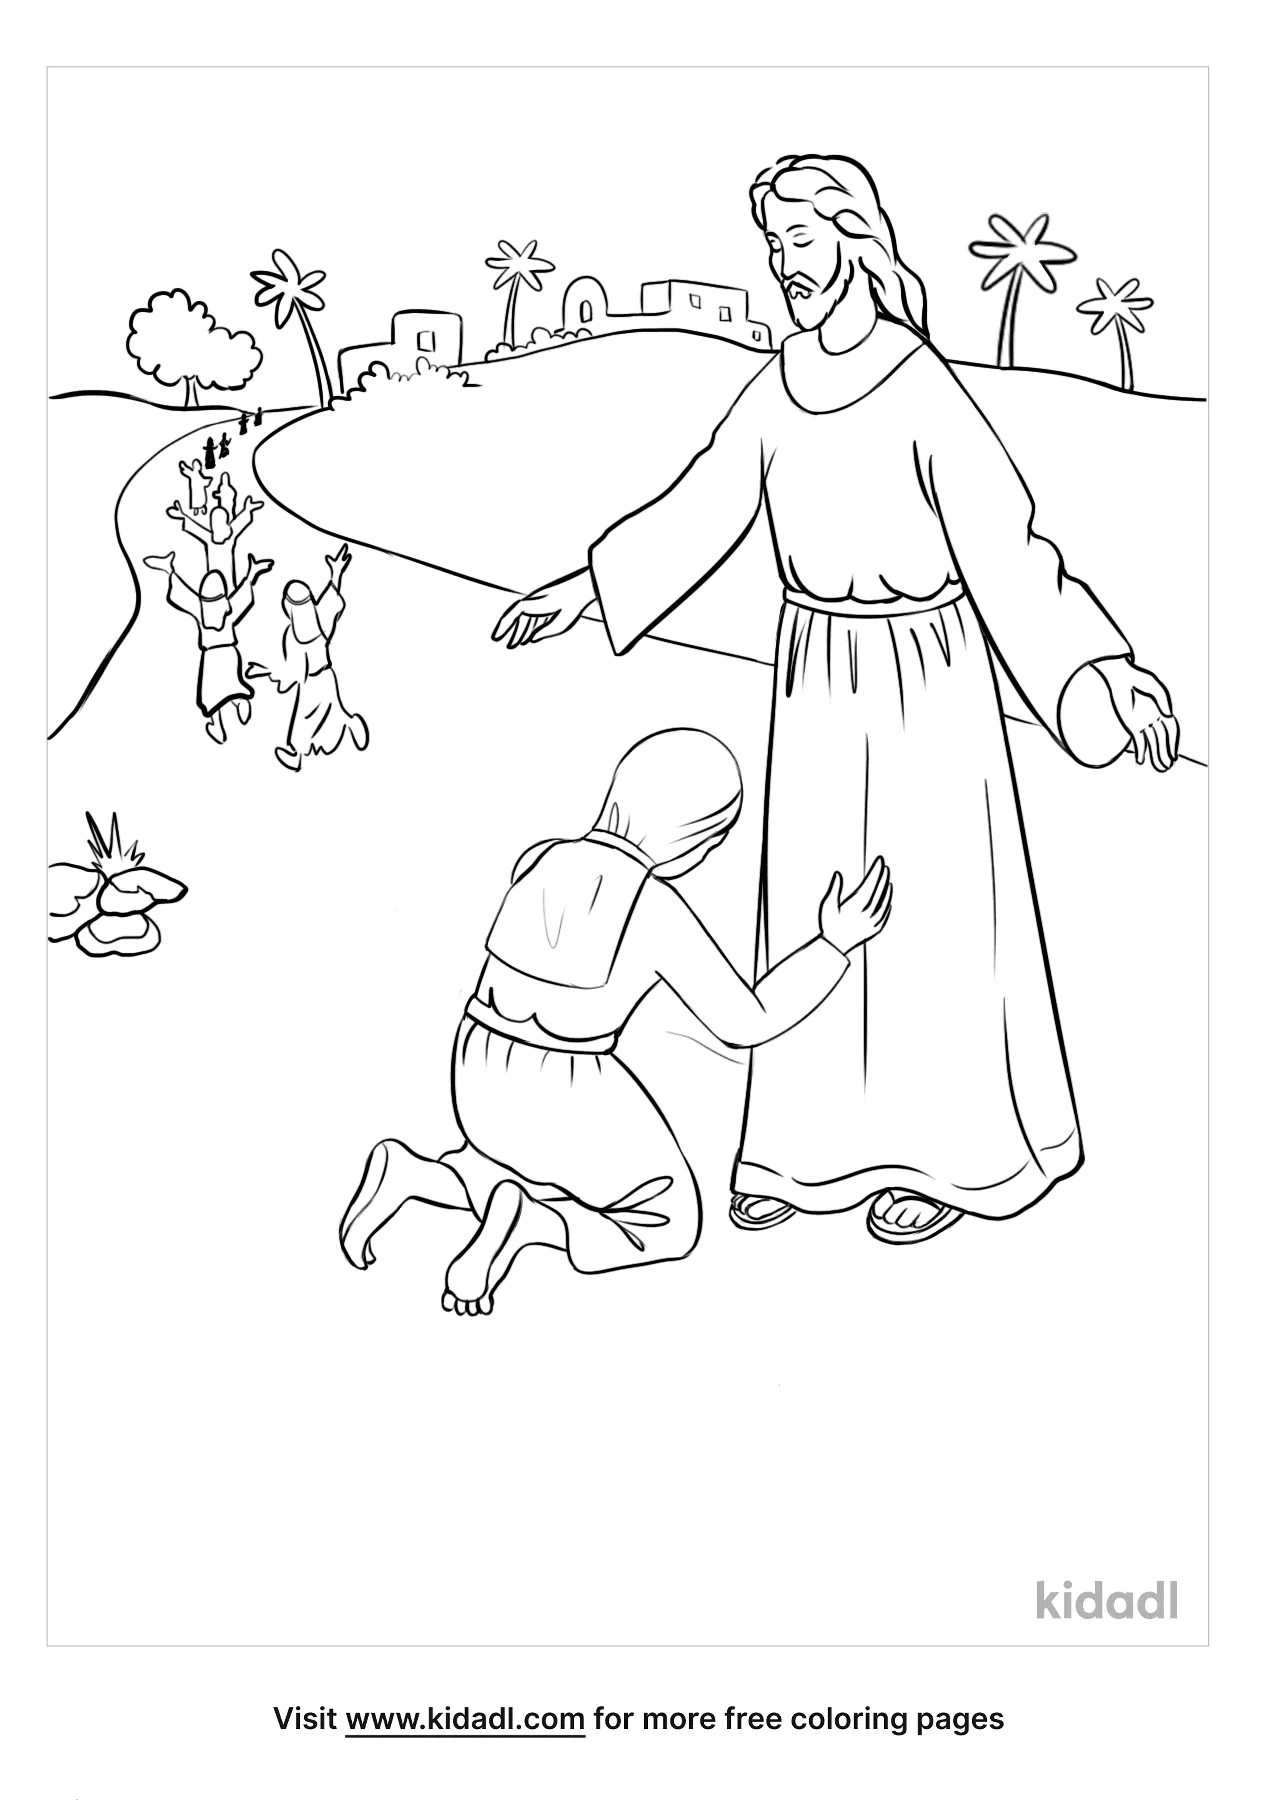 Free lepers coloring page coloring page printables